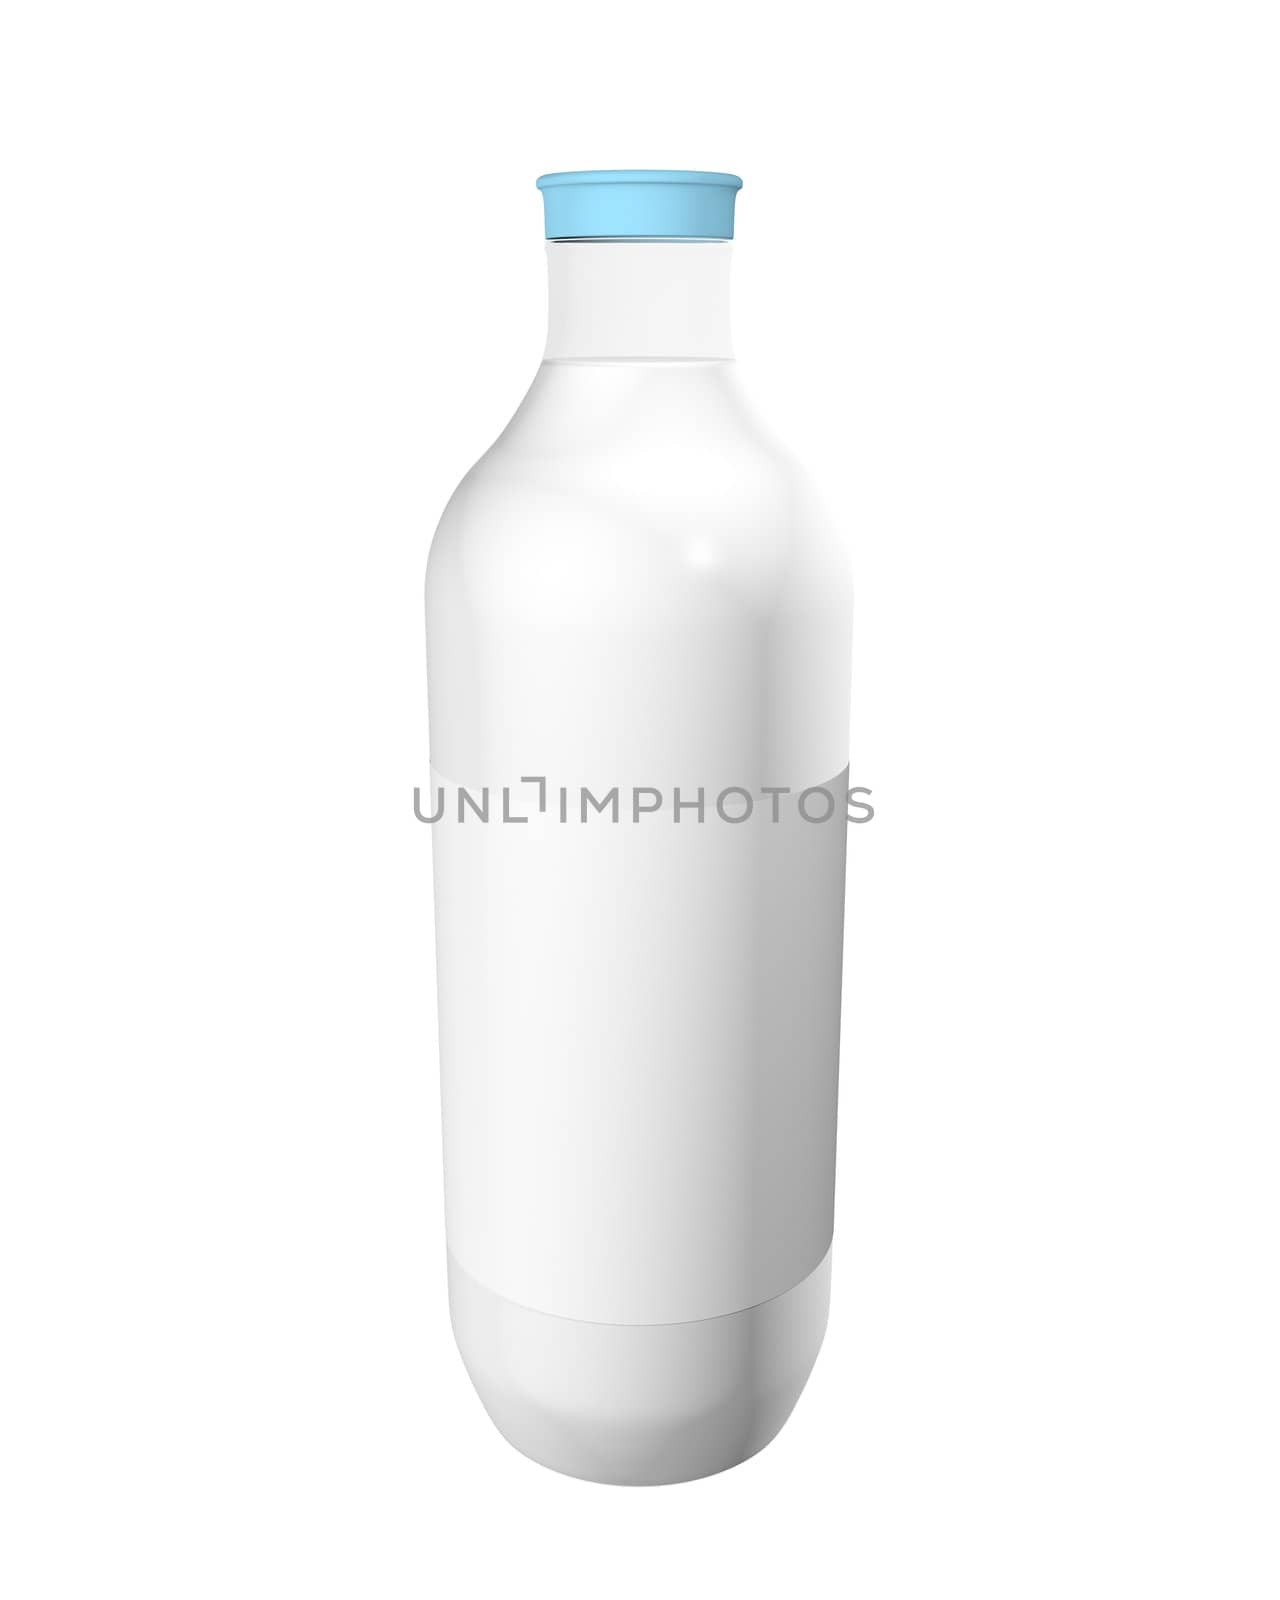 Milk bottle with label by midani